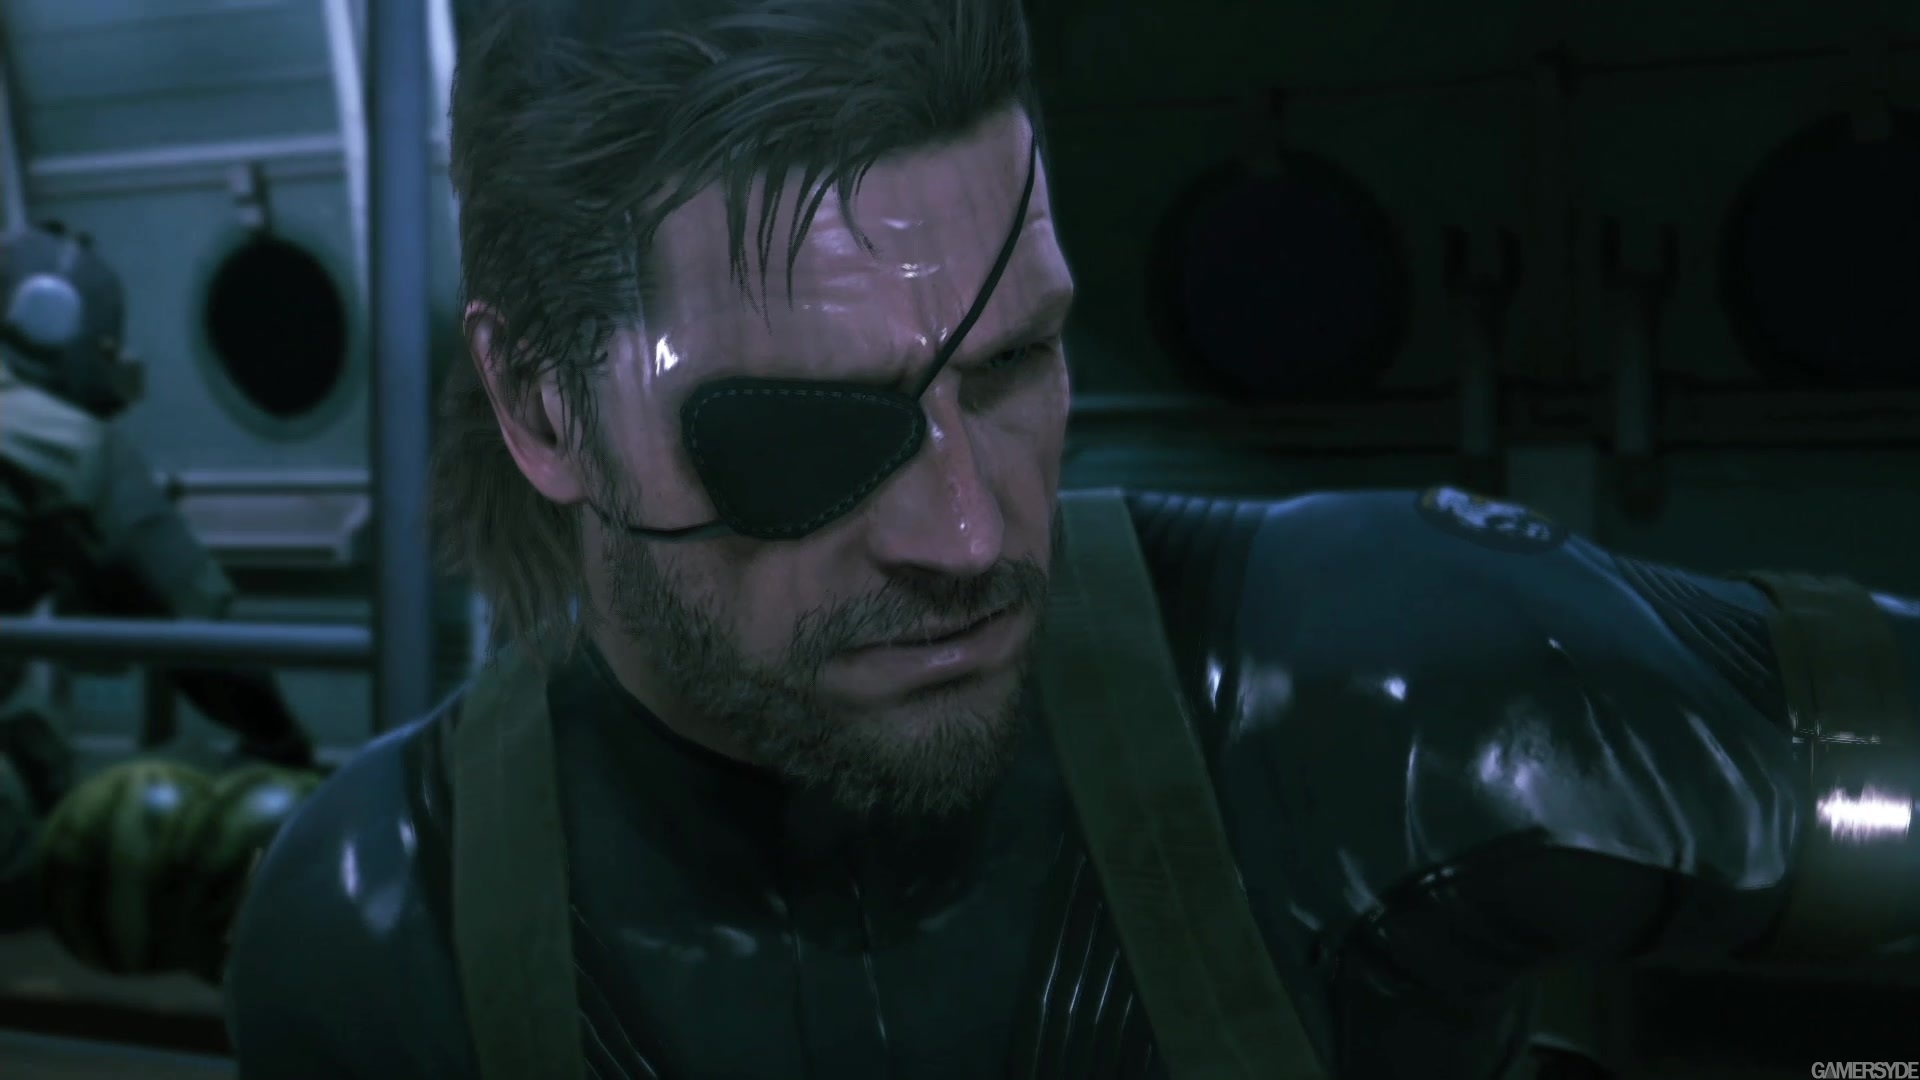 image_metal_gear_solid_v_ground_zeroes-23907-2849_0002.jpg